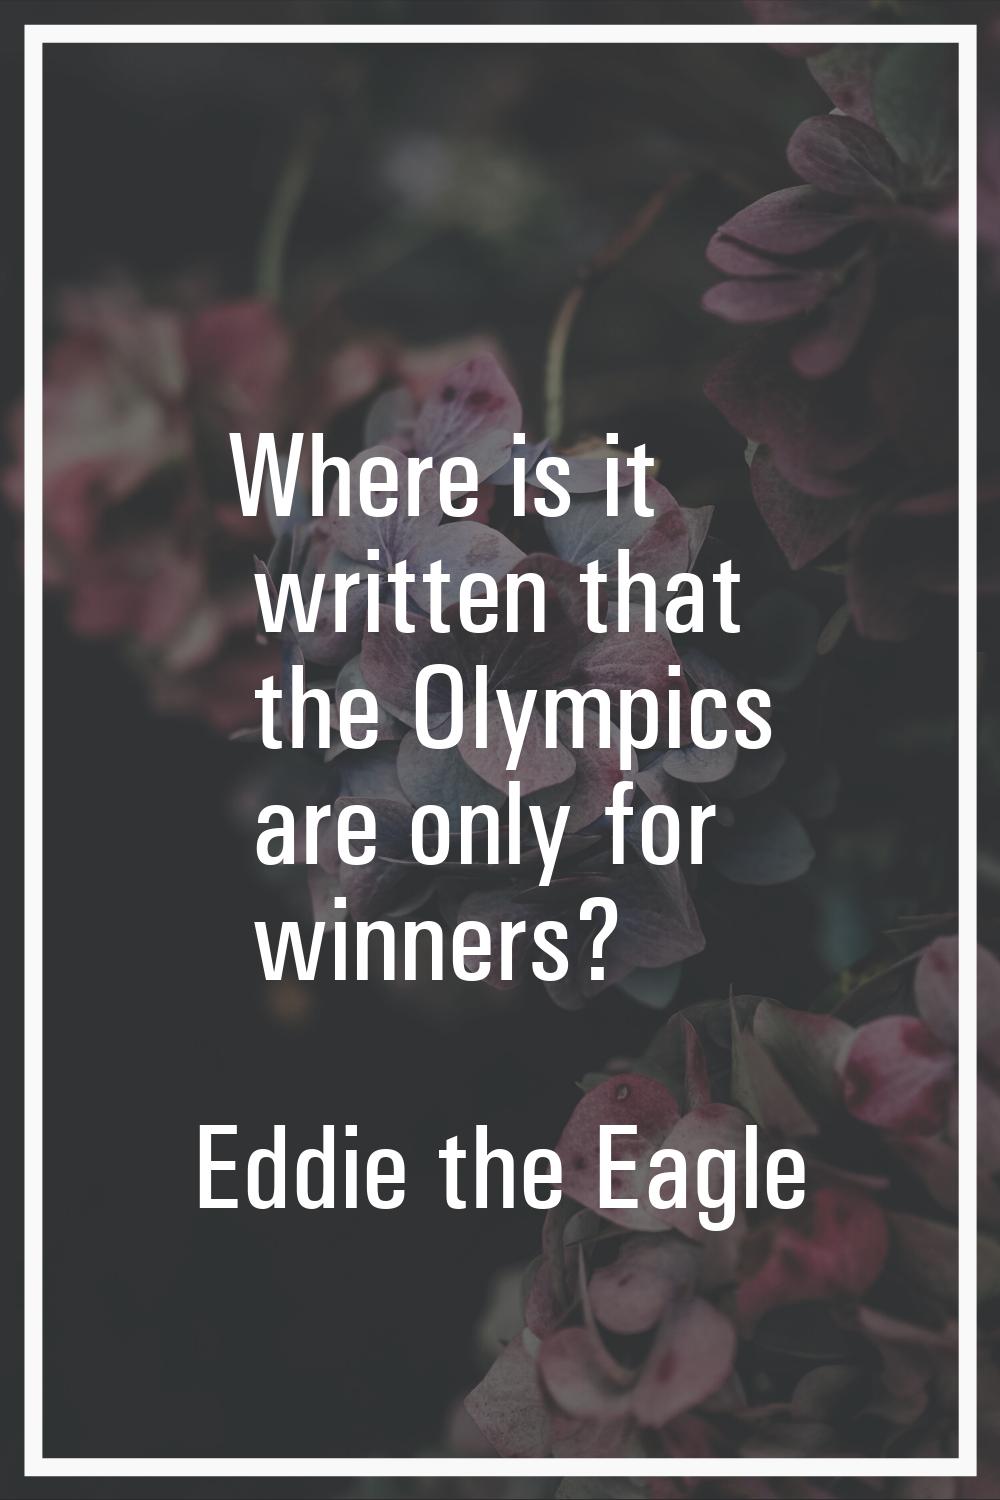 Where is it written that the Olympics are only for winners?